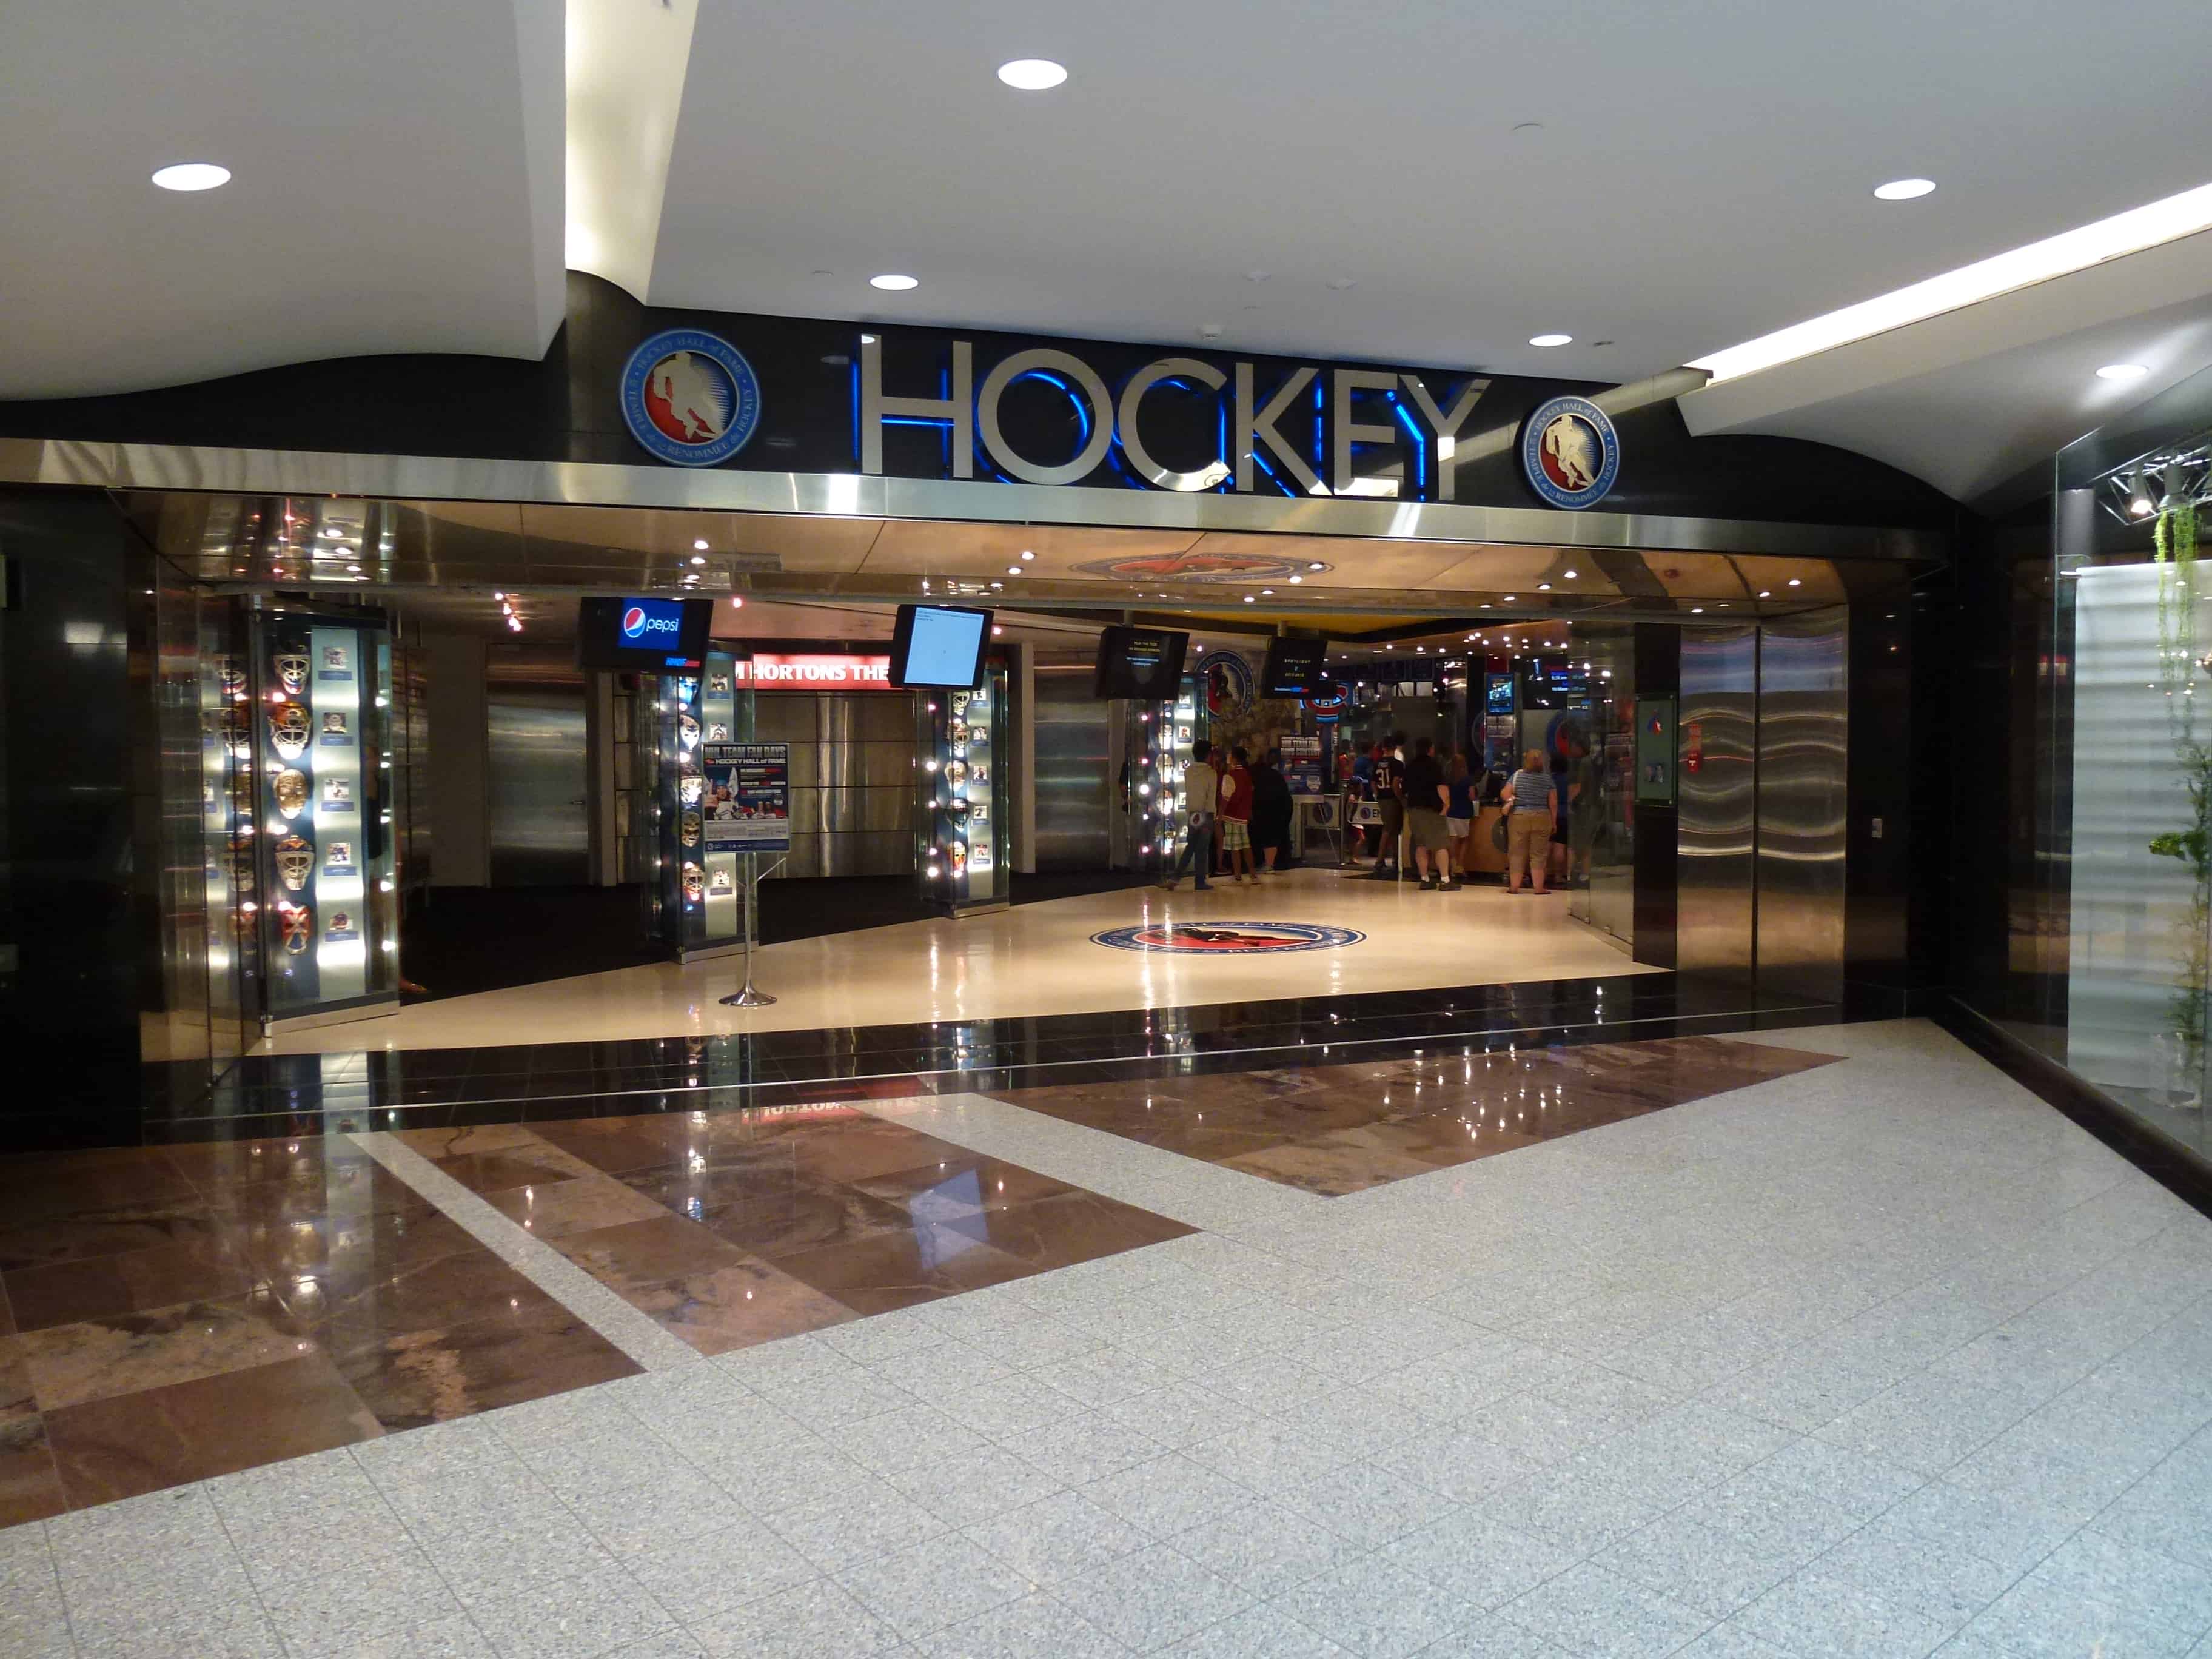 Entrance to the Hockey Hall of Fame in Toronto, Ontario, Canada